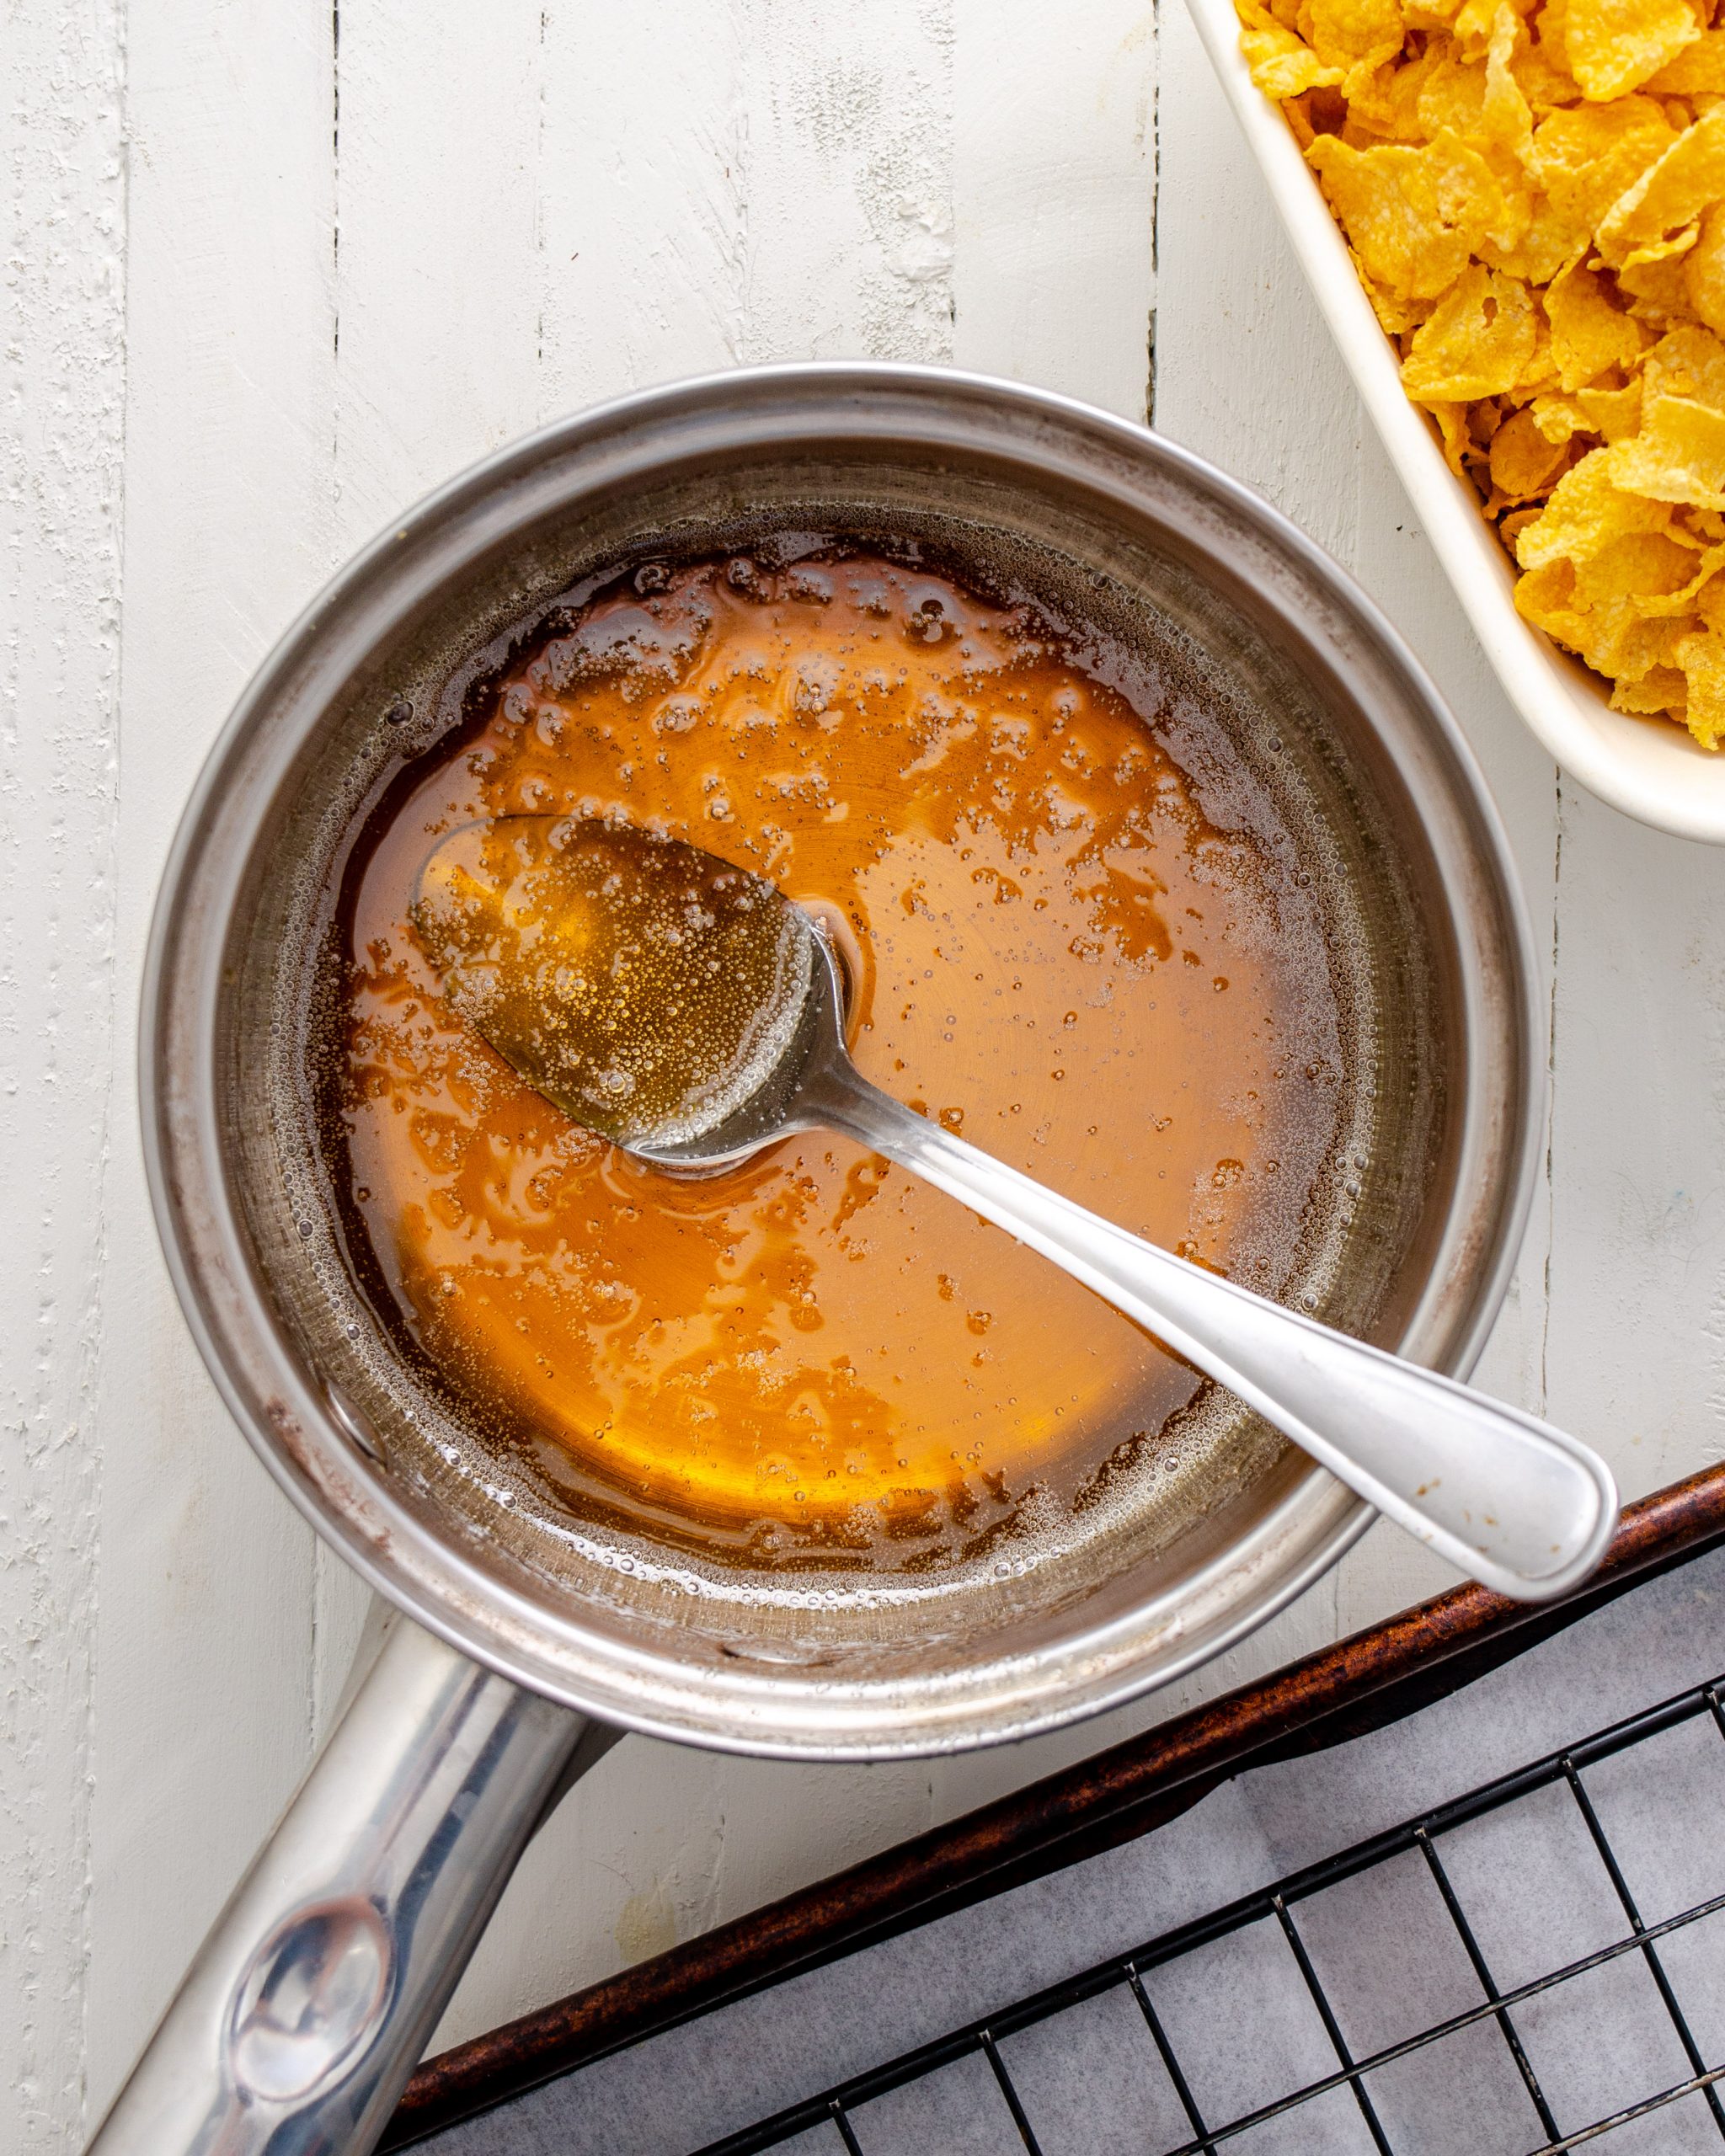 Cook the sugar and corn syrup in a cup over medium heat.